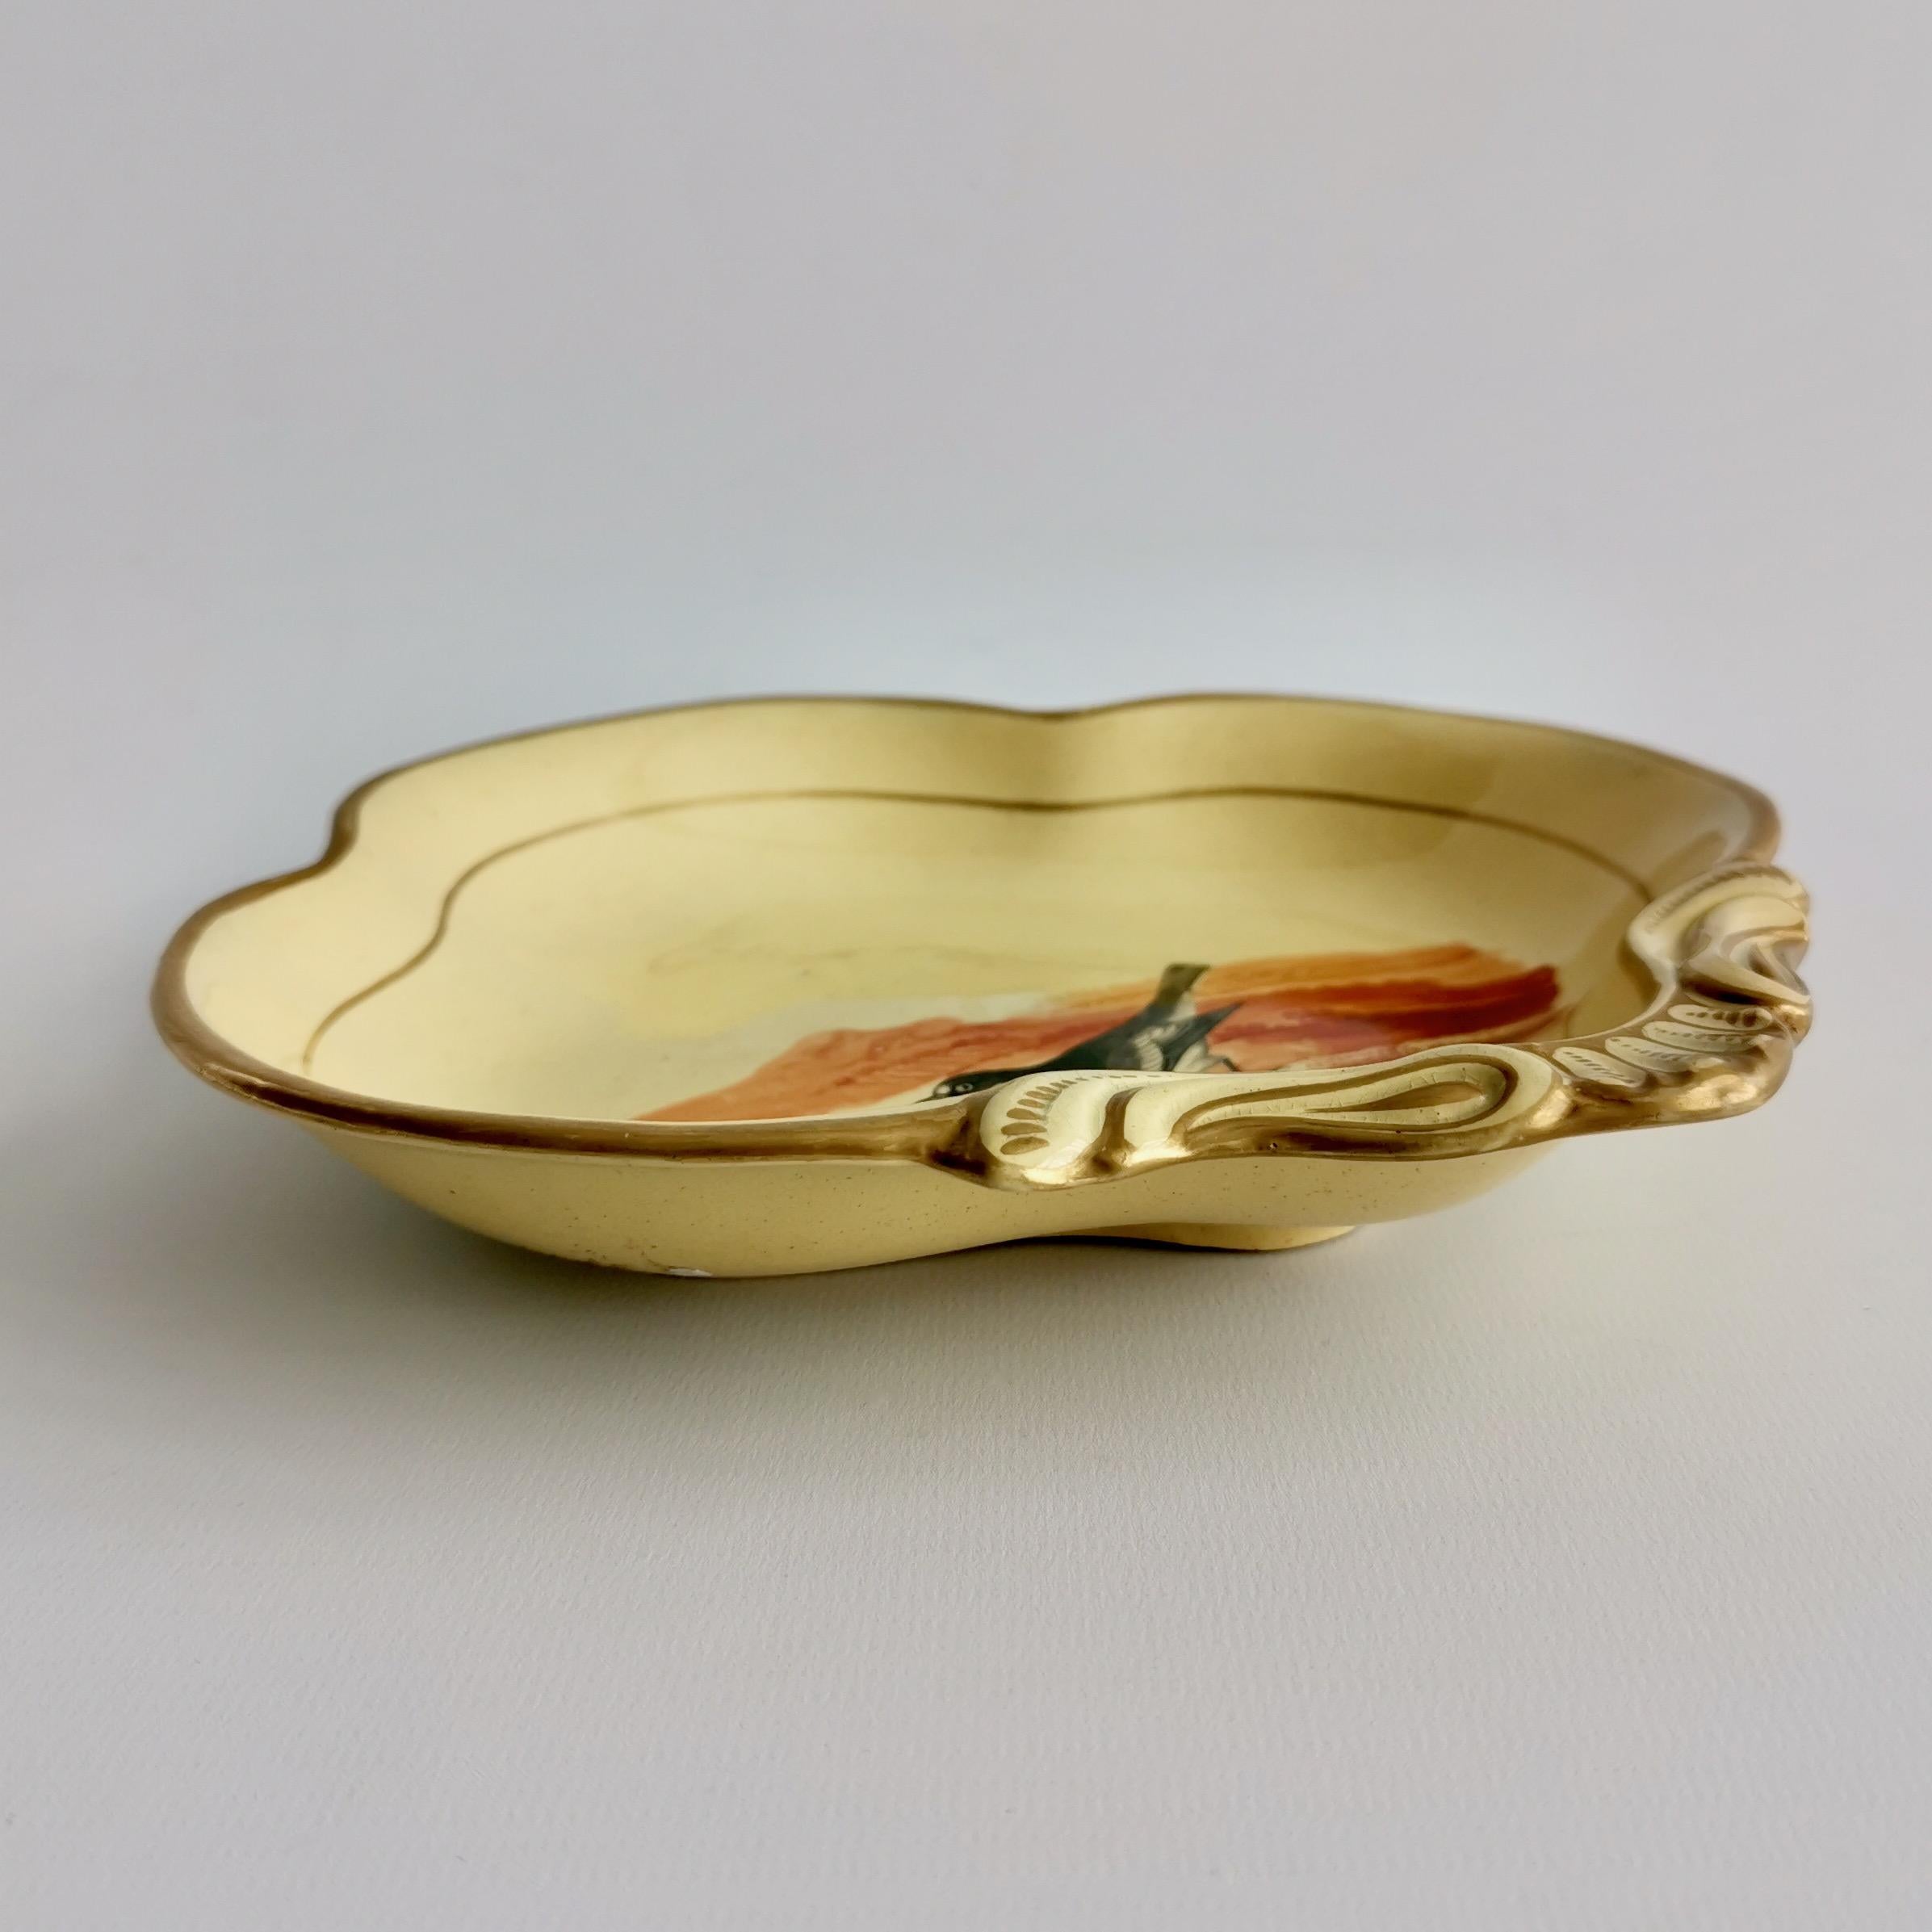 Early 19th Century Pearlware Beige Shell Dish with Bird Attributed to Wedgwood, Regency, circa 1820